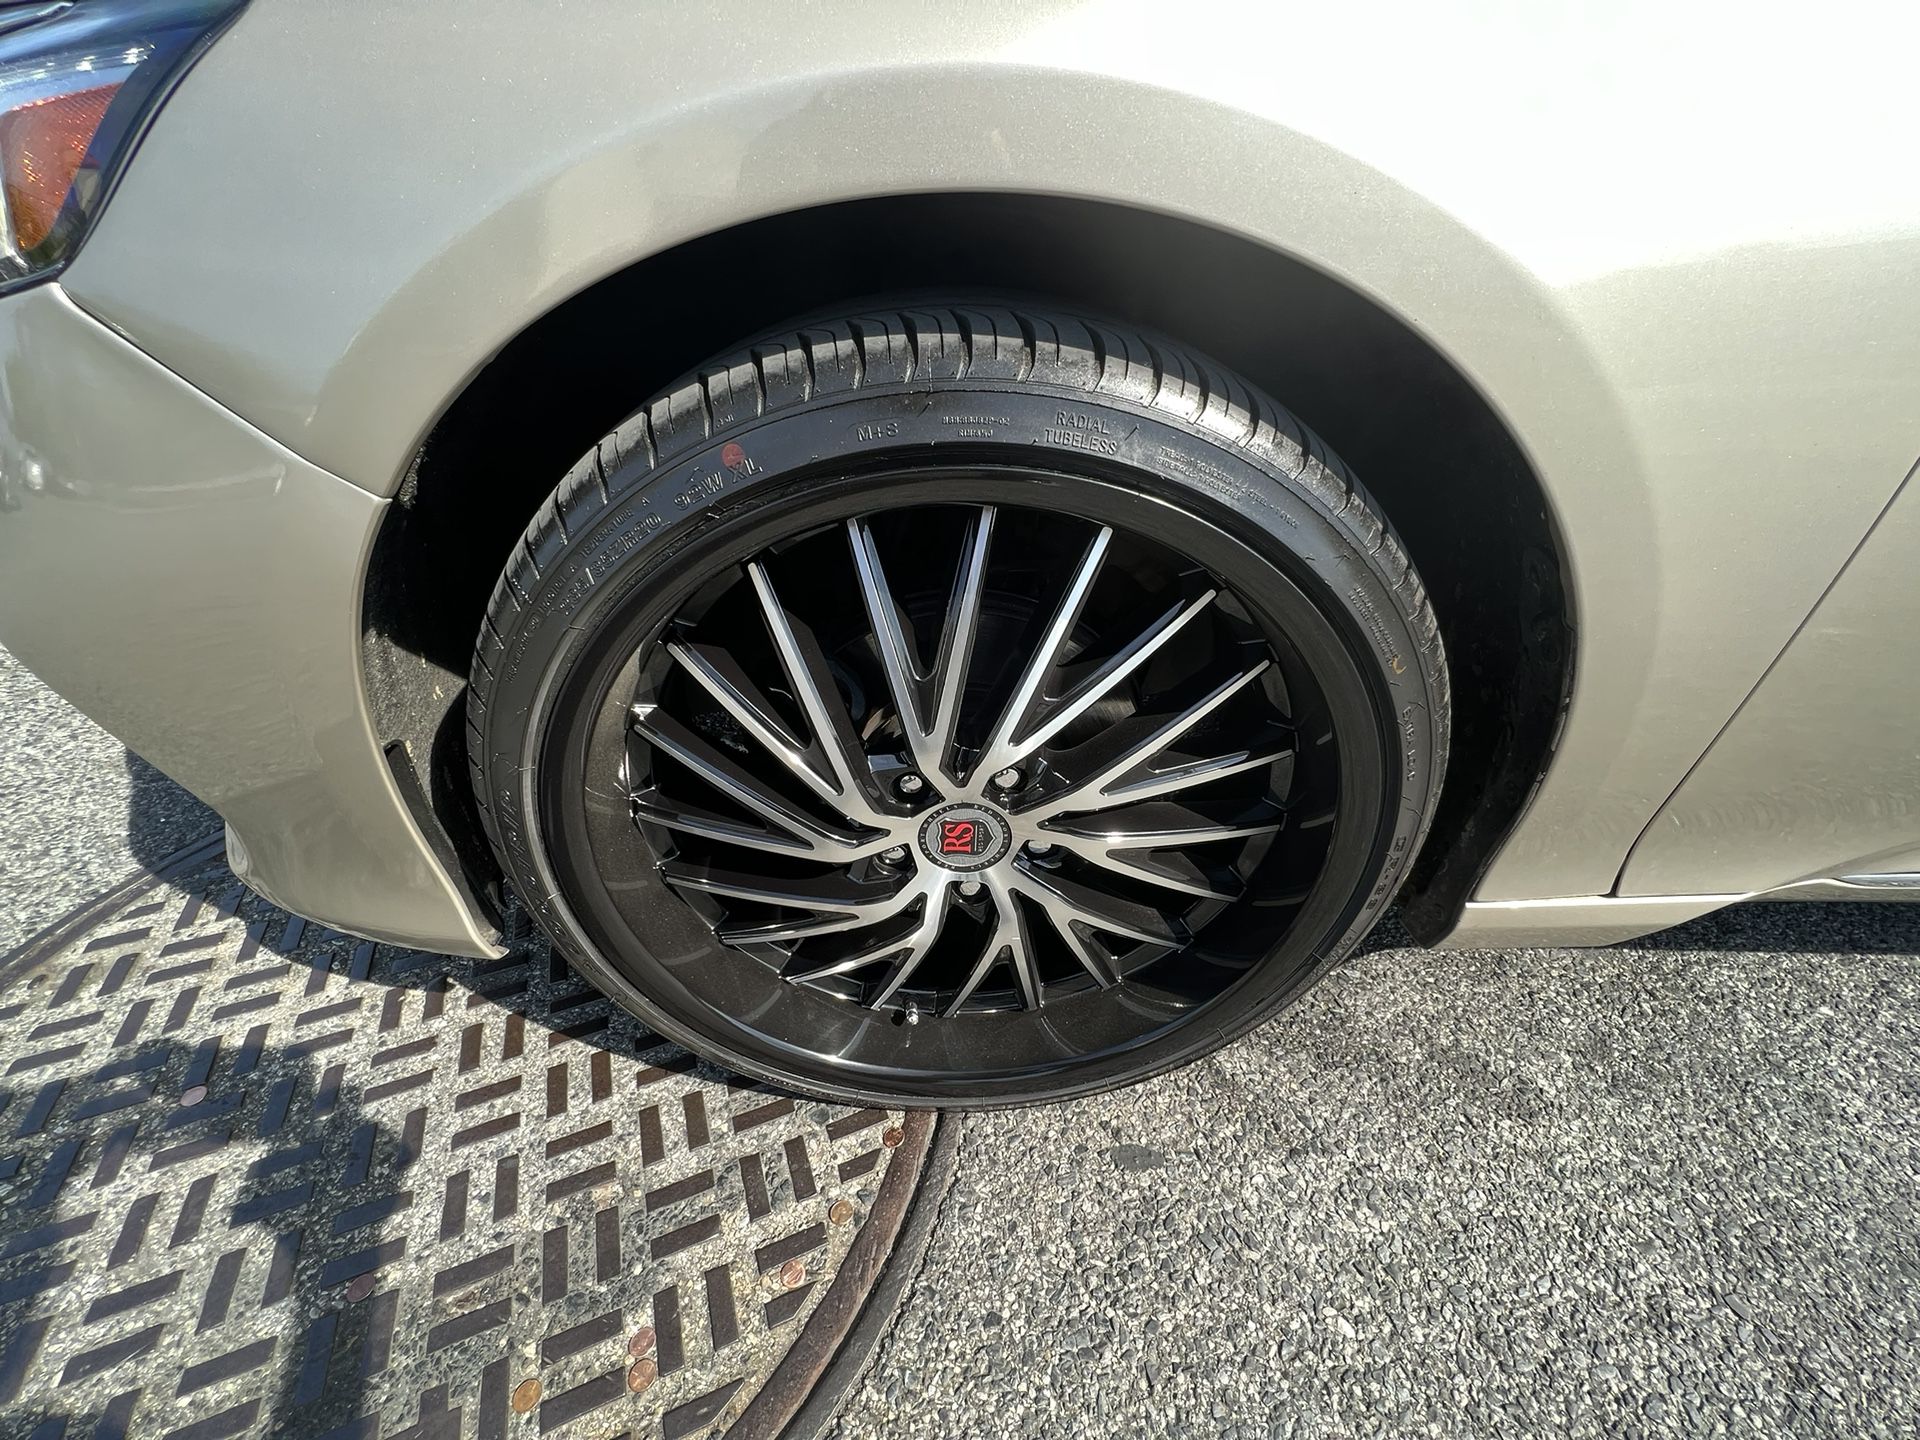 Rims And Tires For Sale